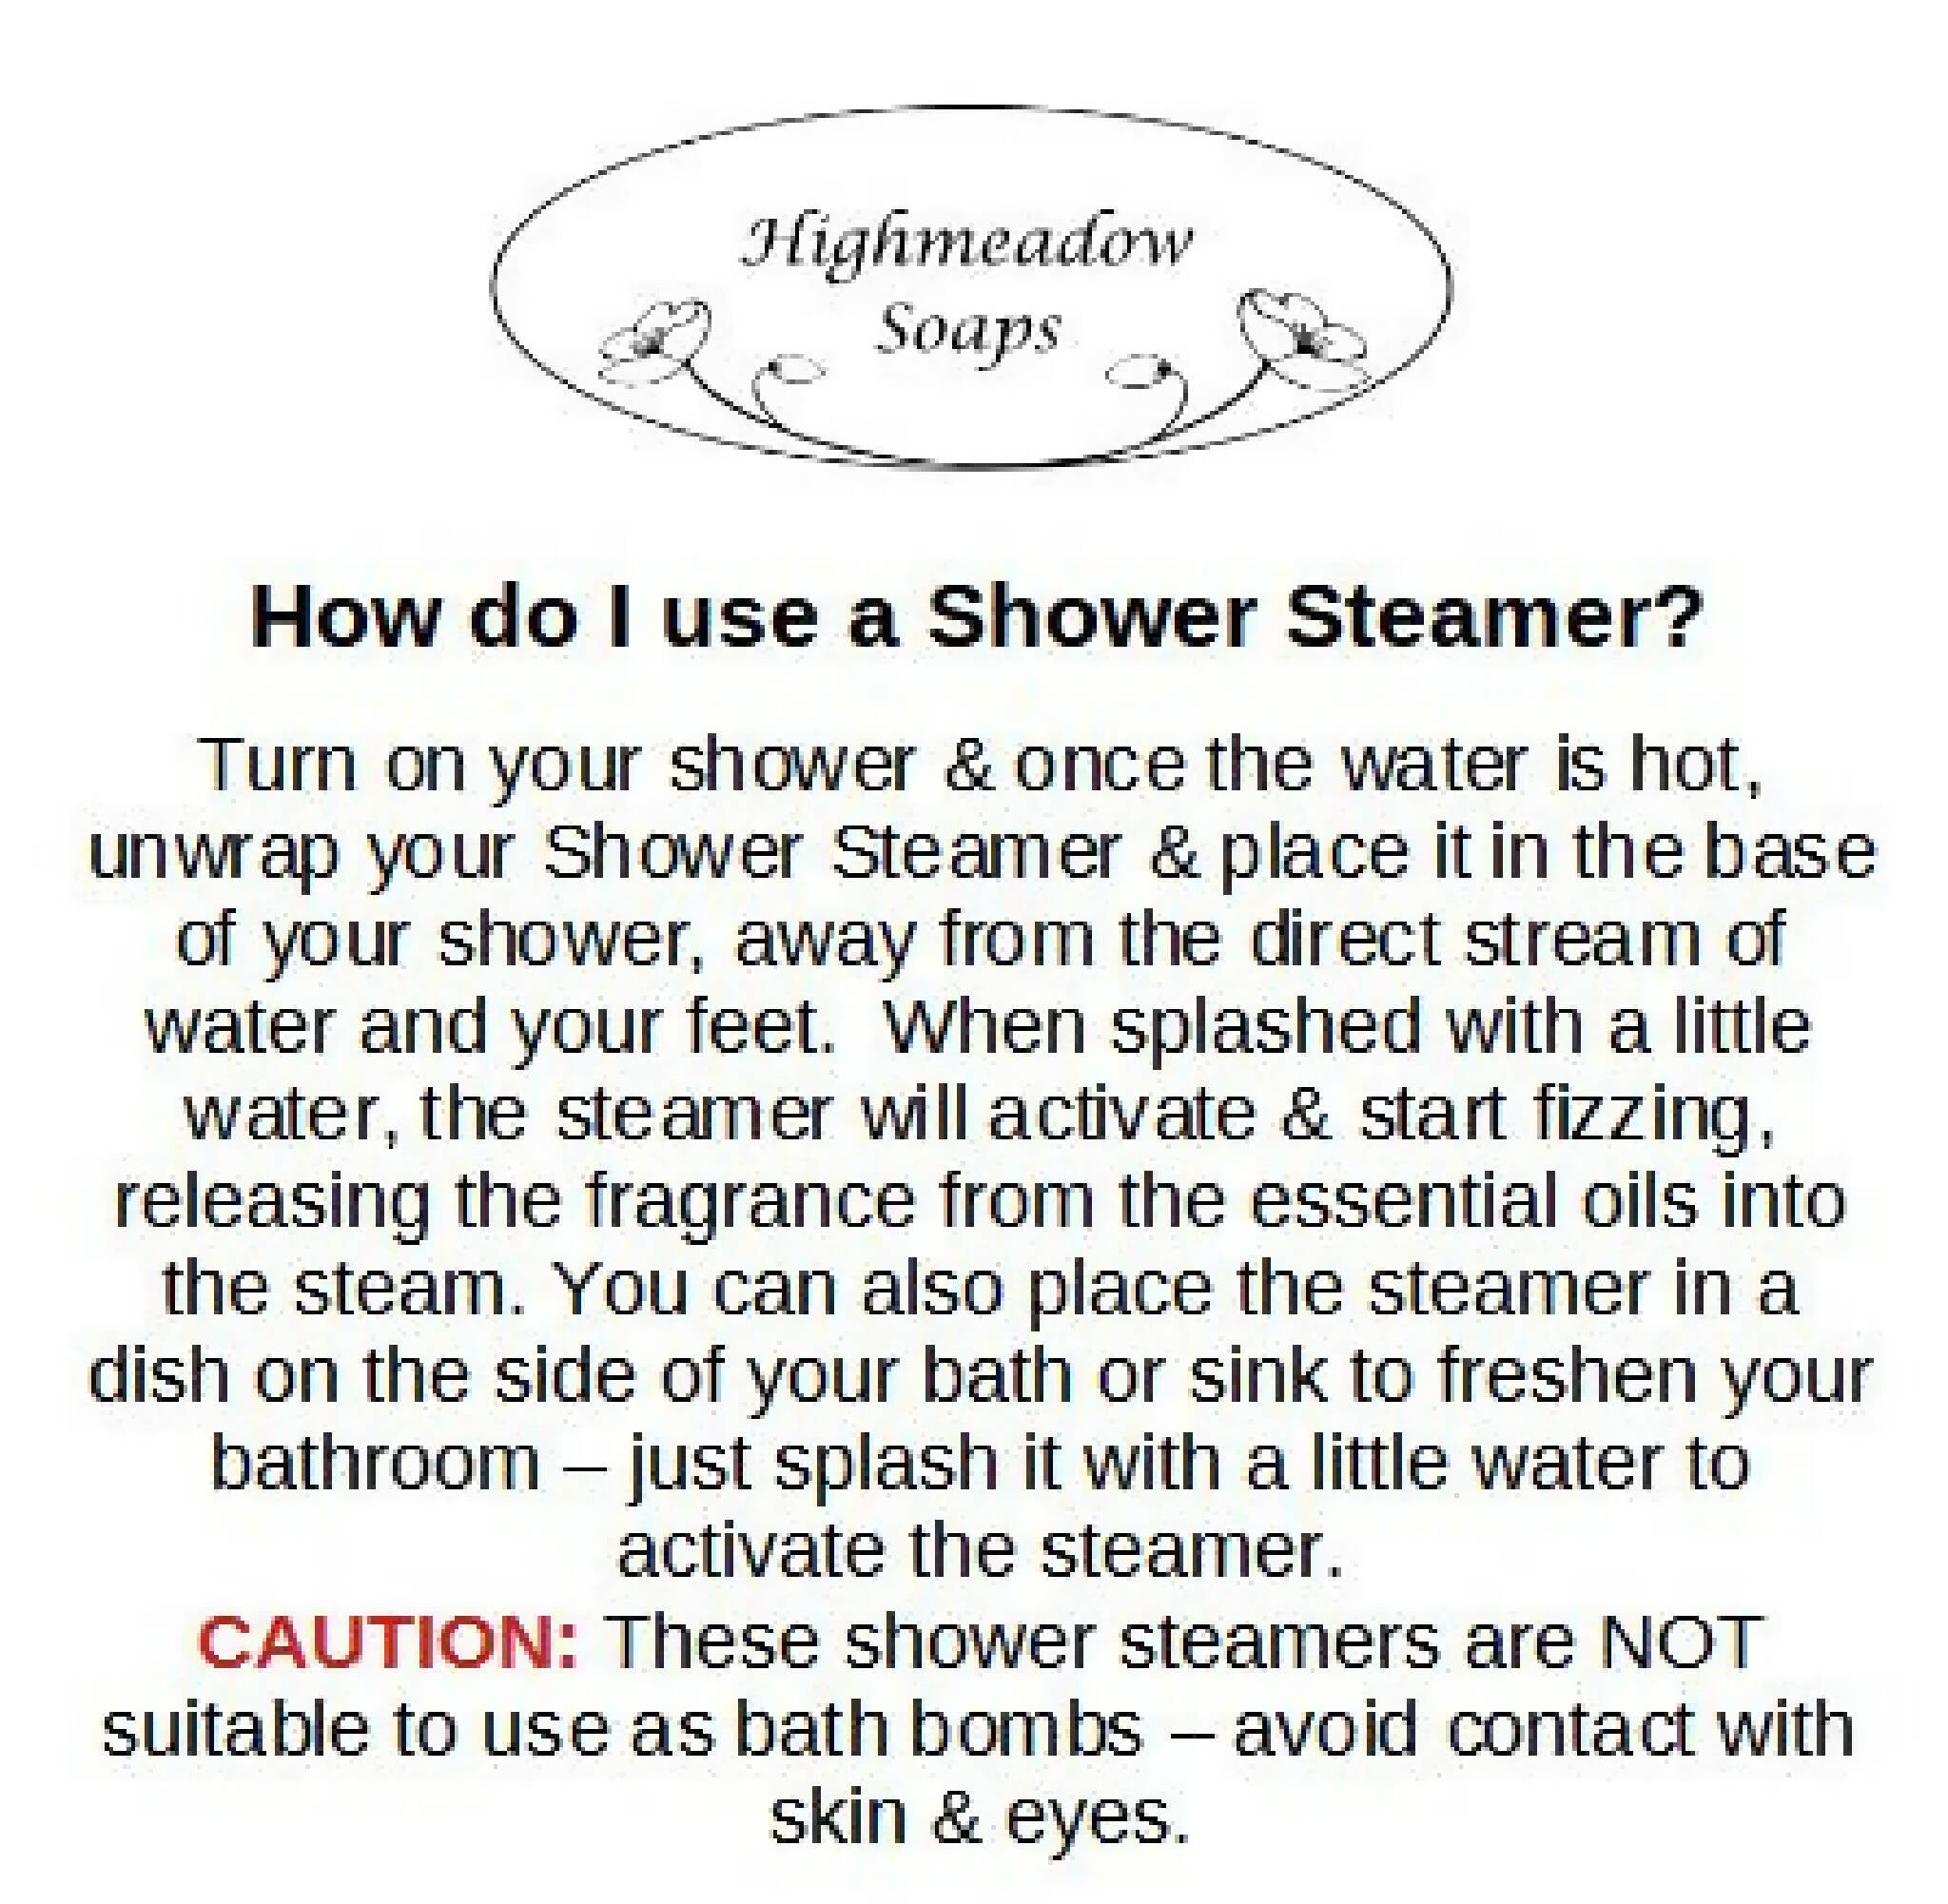 How to use a Shower Steamer